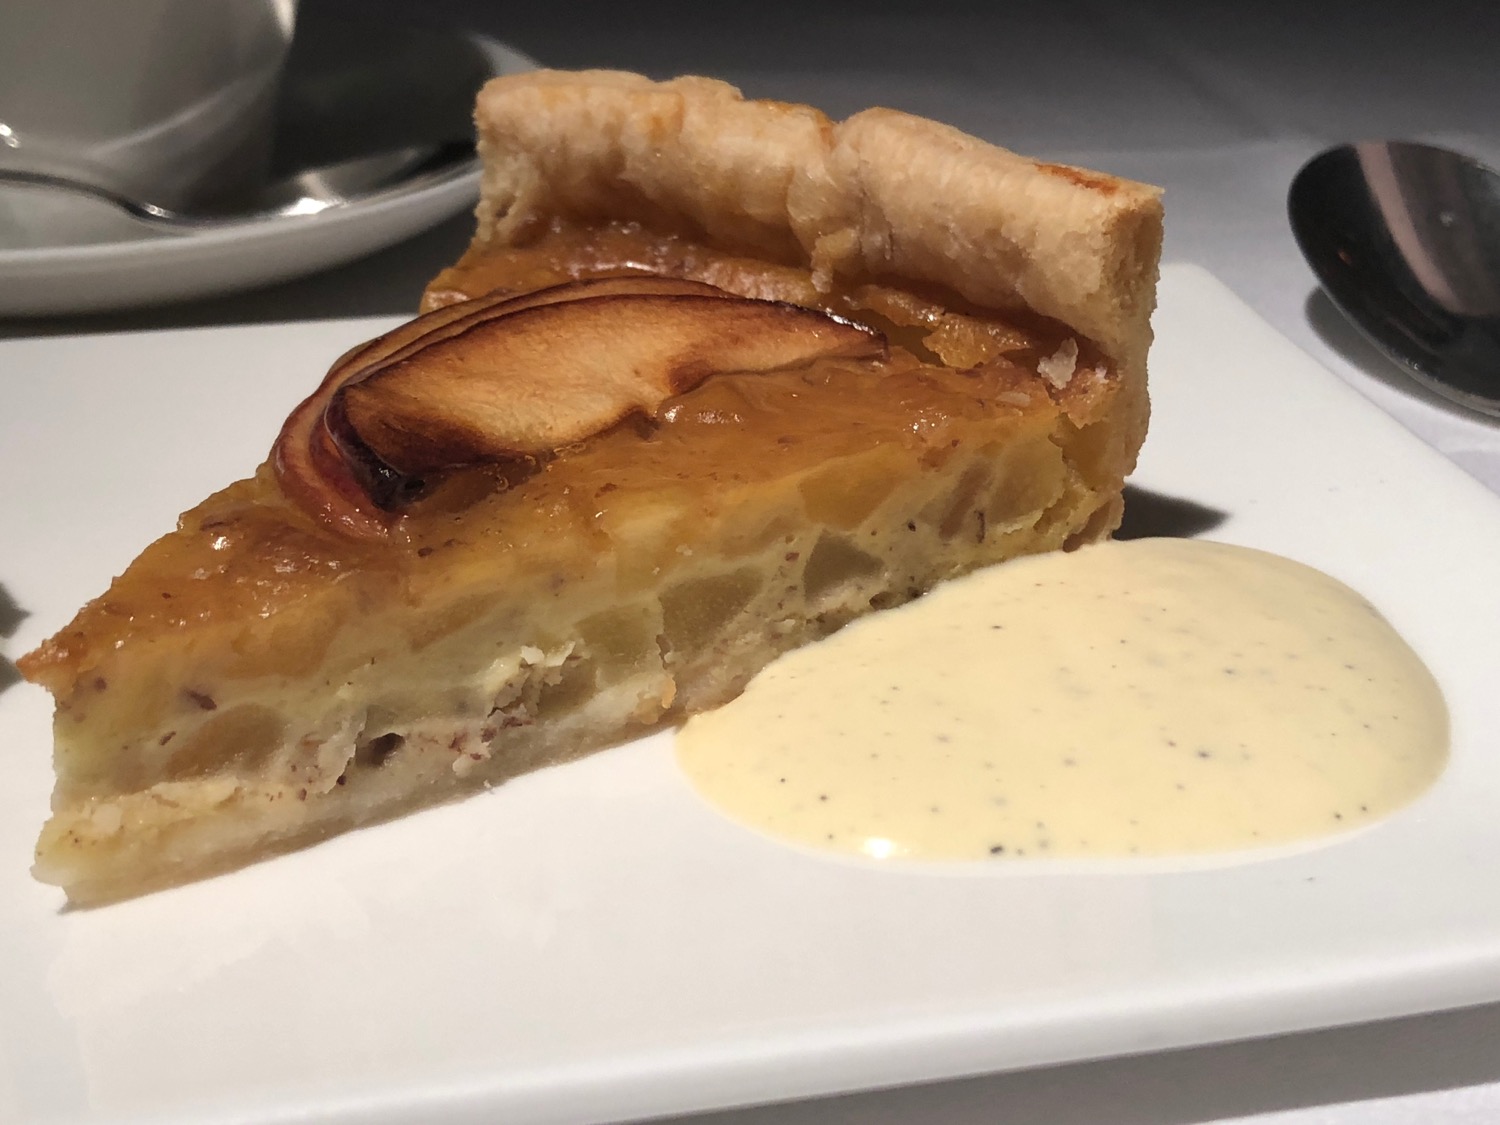 a slice of pie on a plate with sauce